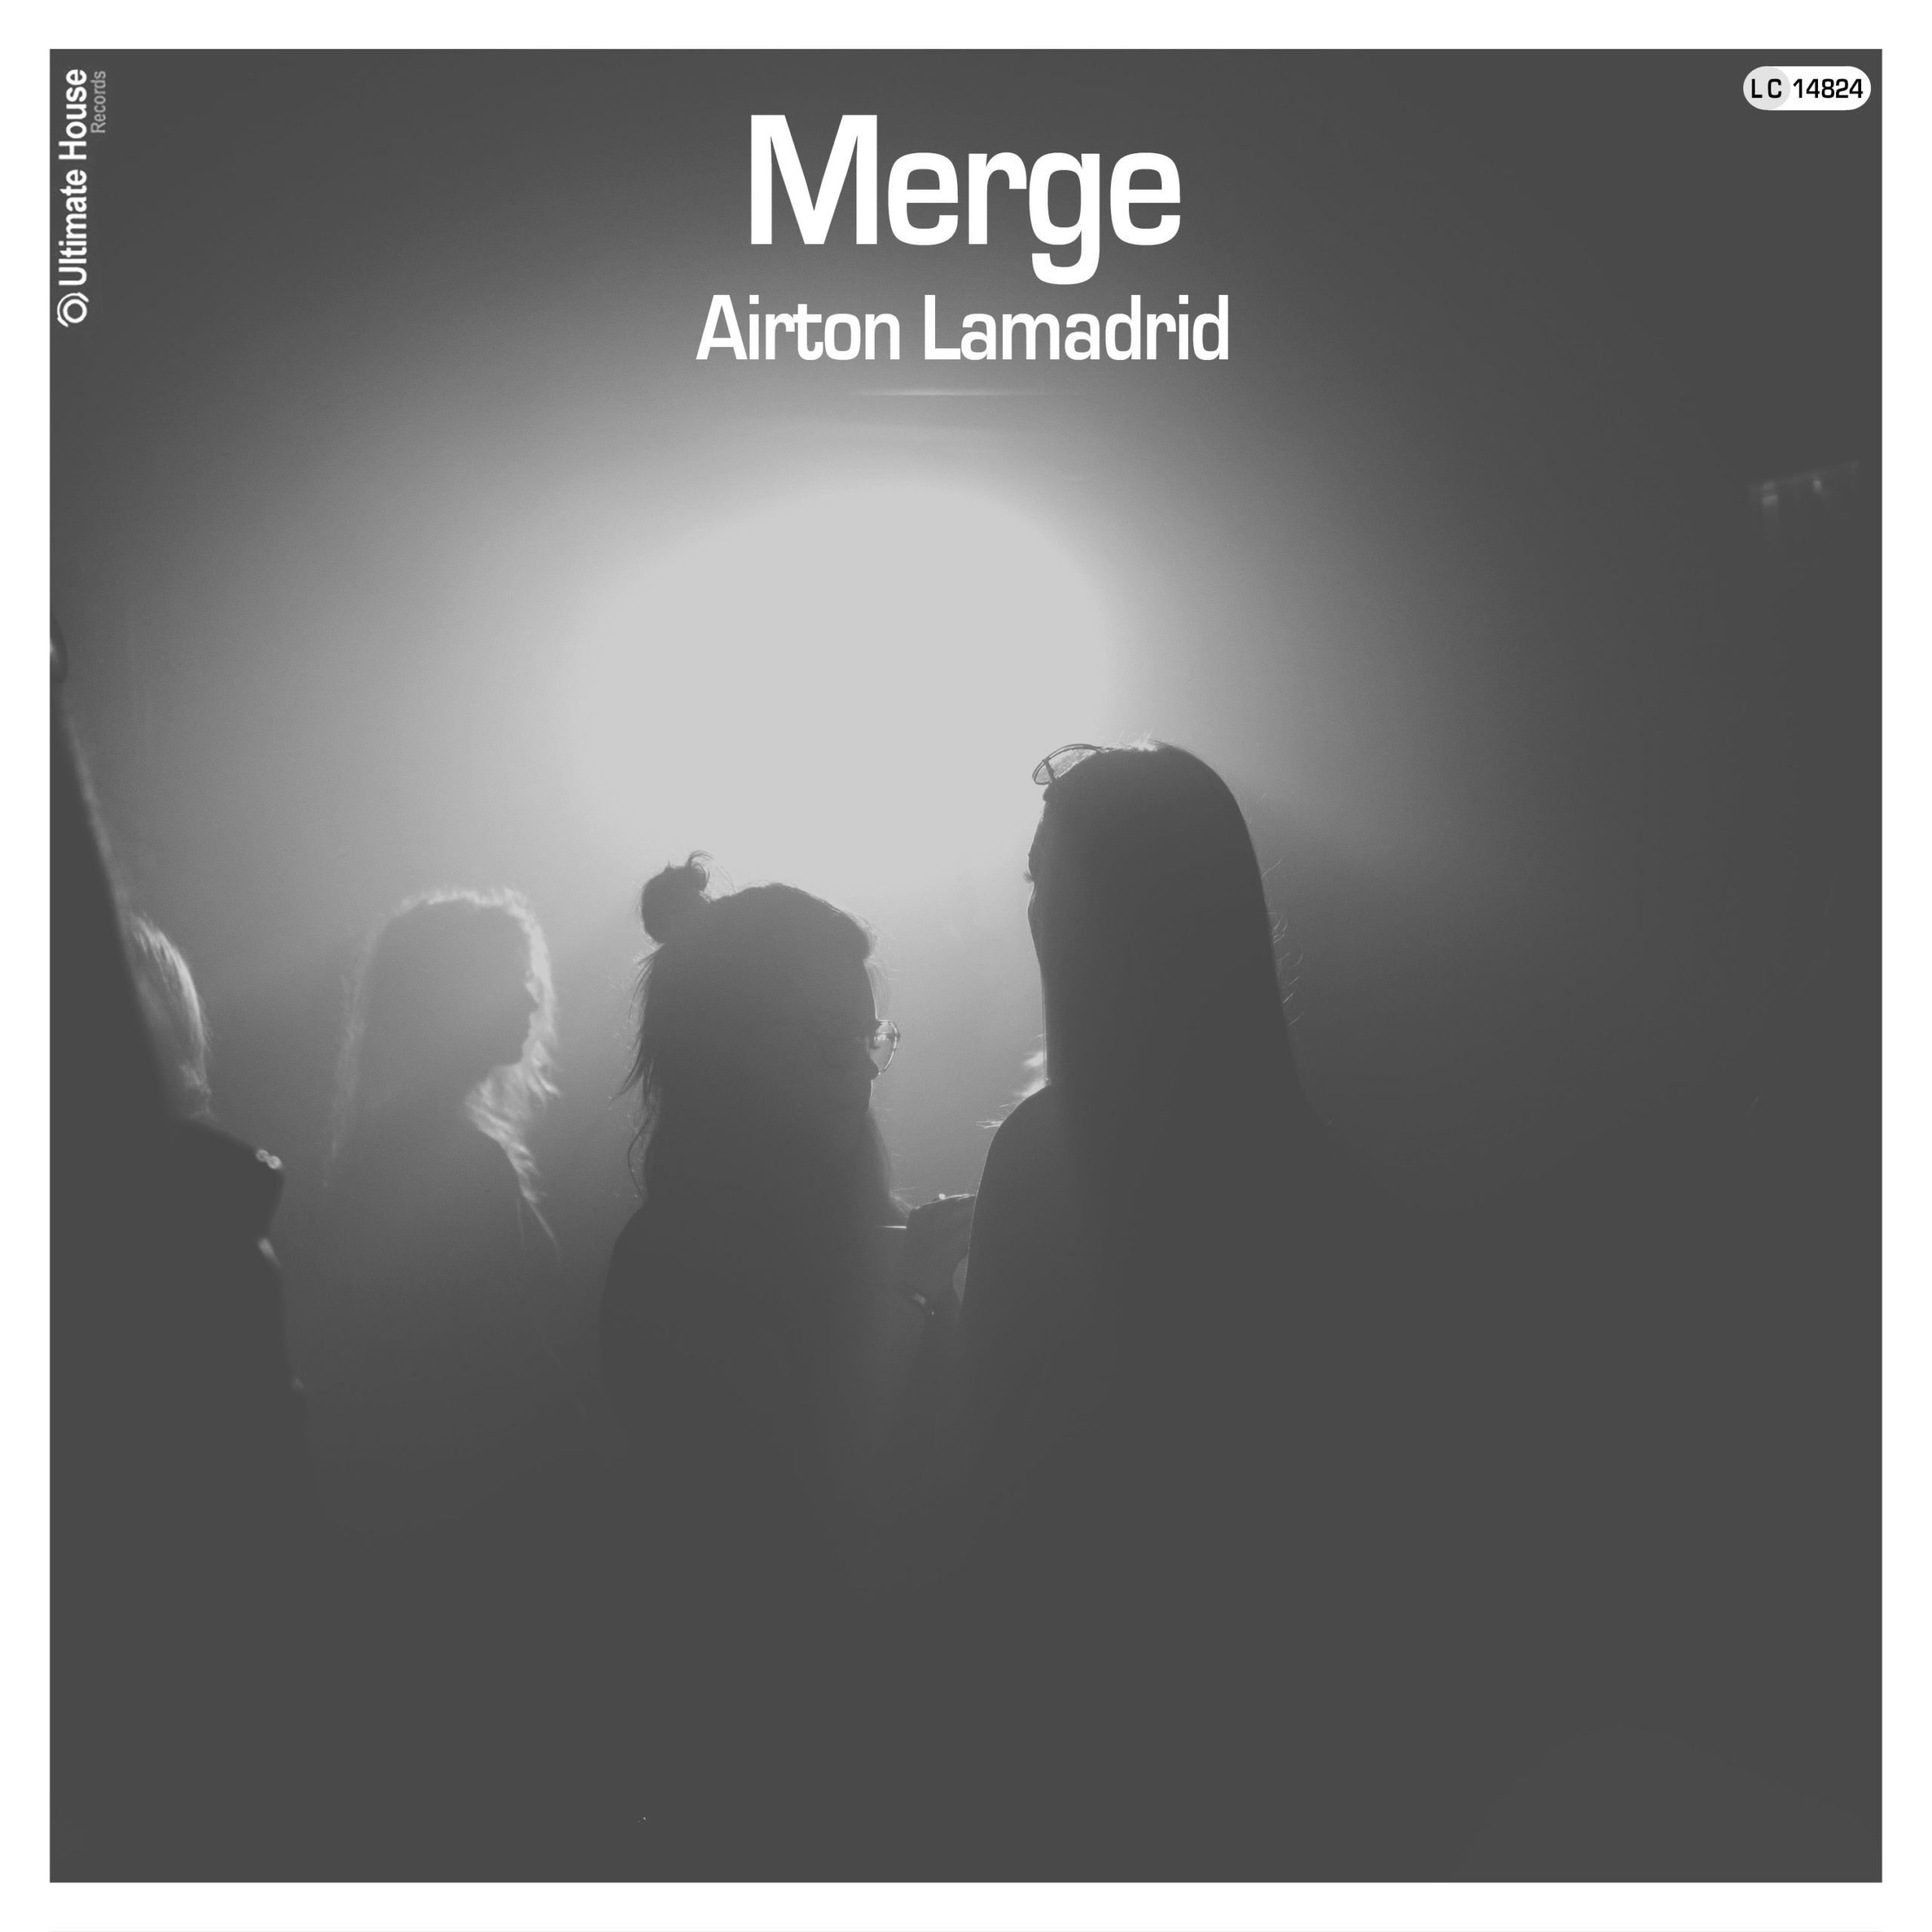 https://www.ultimate-house-records.com/wp-content/uploads/2022/12/168-Airton_Lamadrid-Merge-Cover_3000px_web-scaled.jpg